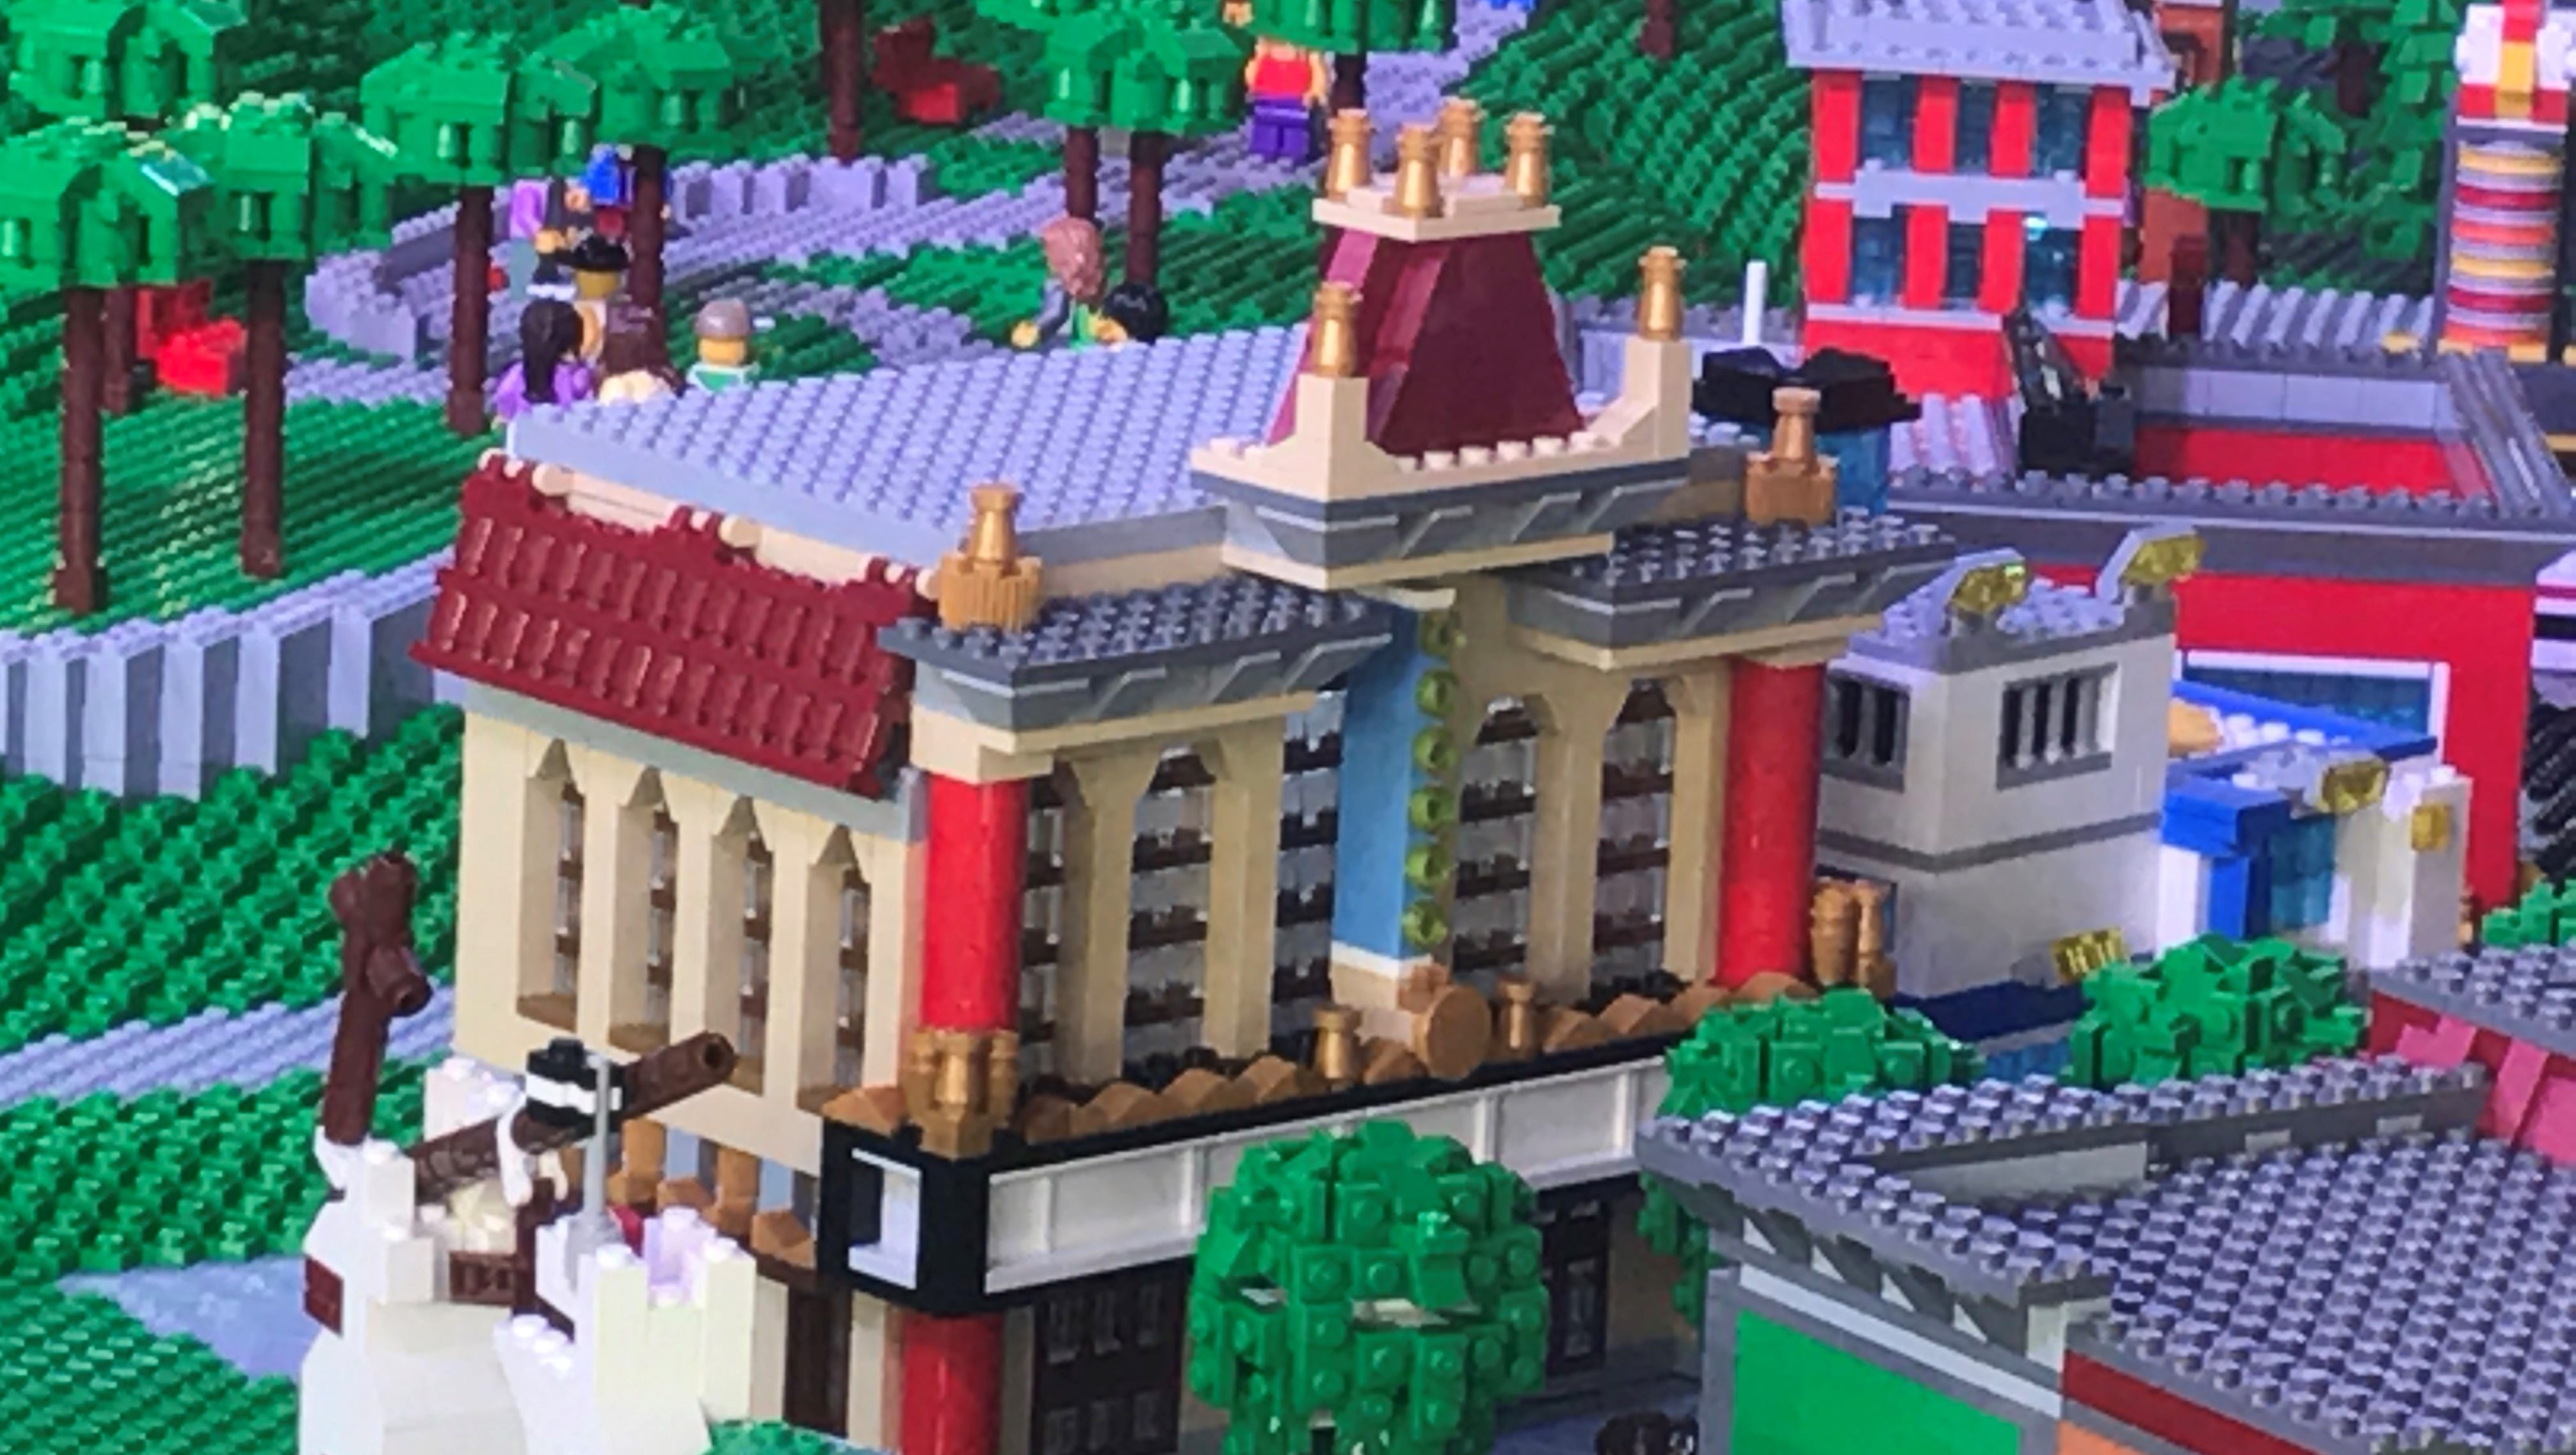 LEGO gives a preview of LEGOLAND York, open in 2020.